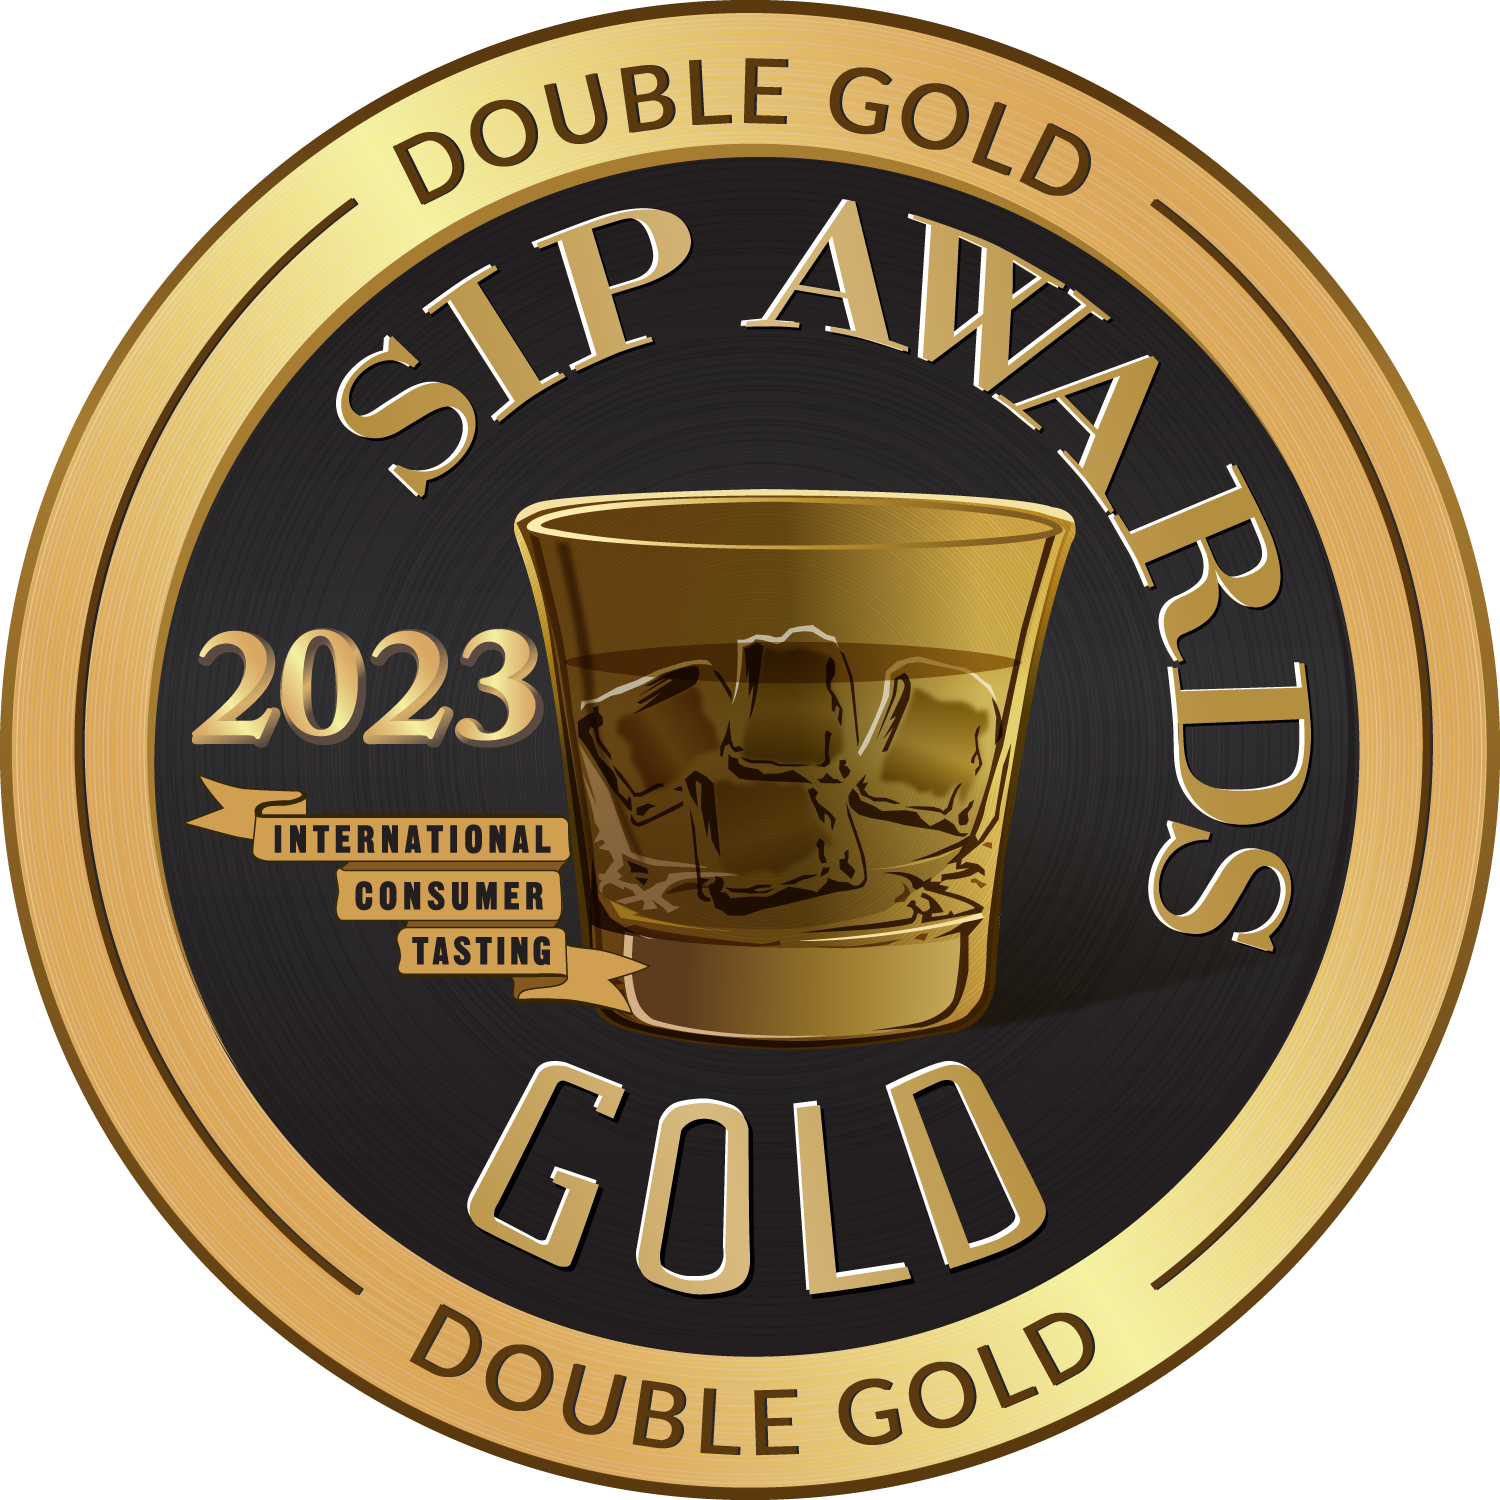 Mixoloshe won the Sip Awards Double Gold Medal in 2023